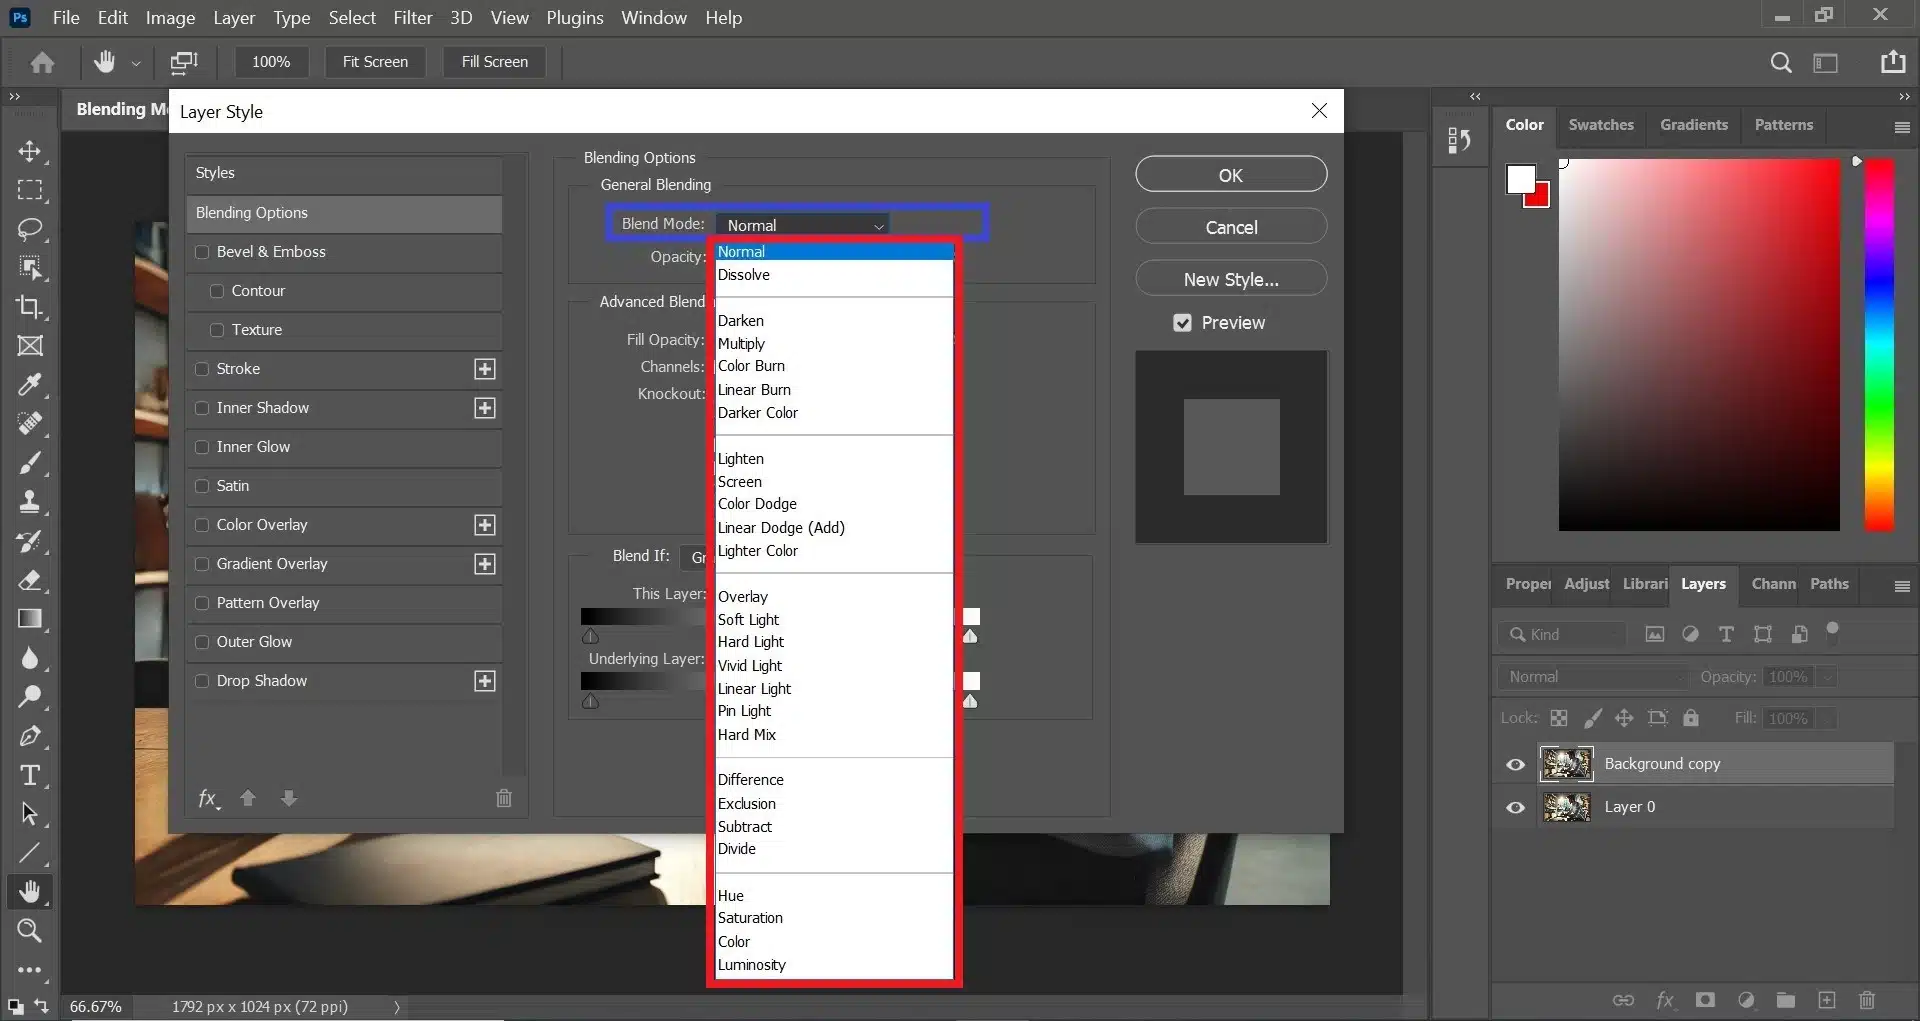 Adobe Photoshop interface showing the Layer Style dialog box with various blending mode options listed. The background includes editing tools and a partial view of a desk.